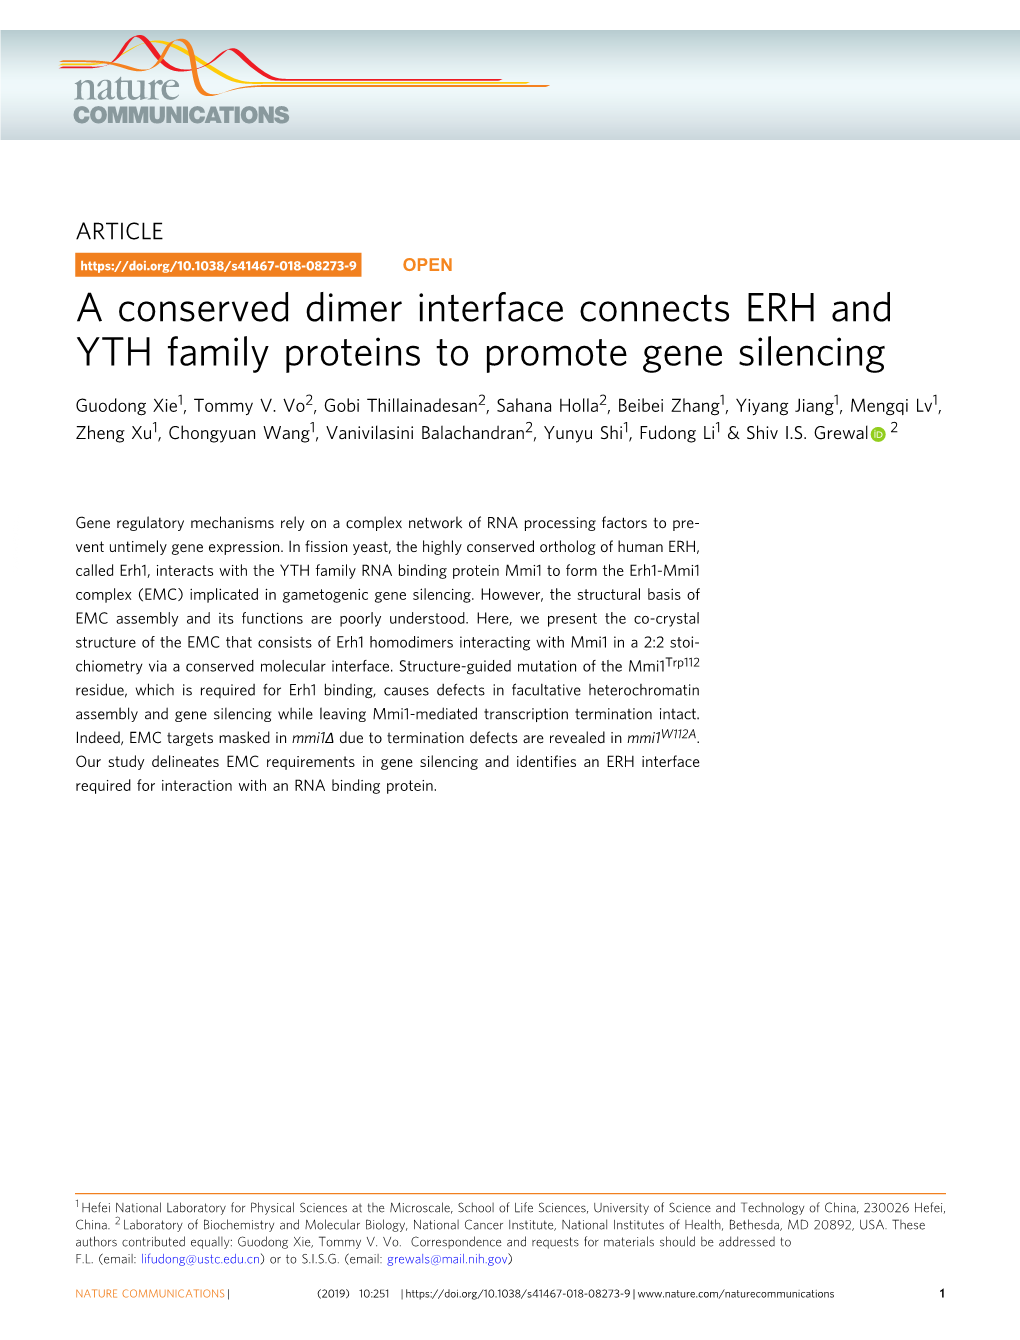 A Conserved Dimer Interface Connects ERH and YTH Family Proteins to Promote Gene Silencing